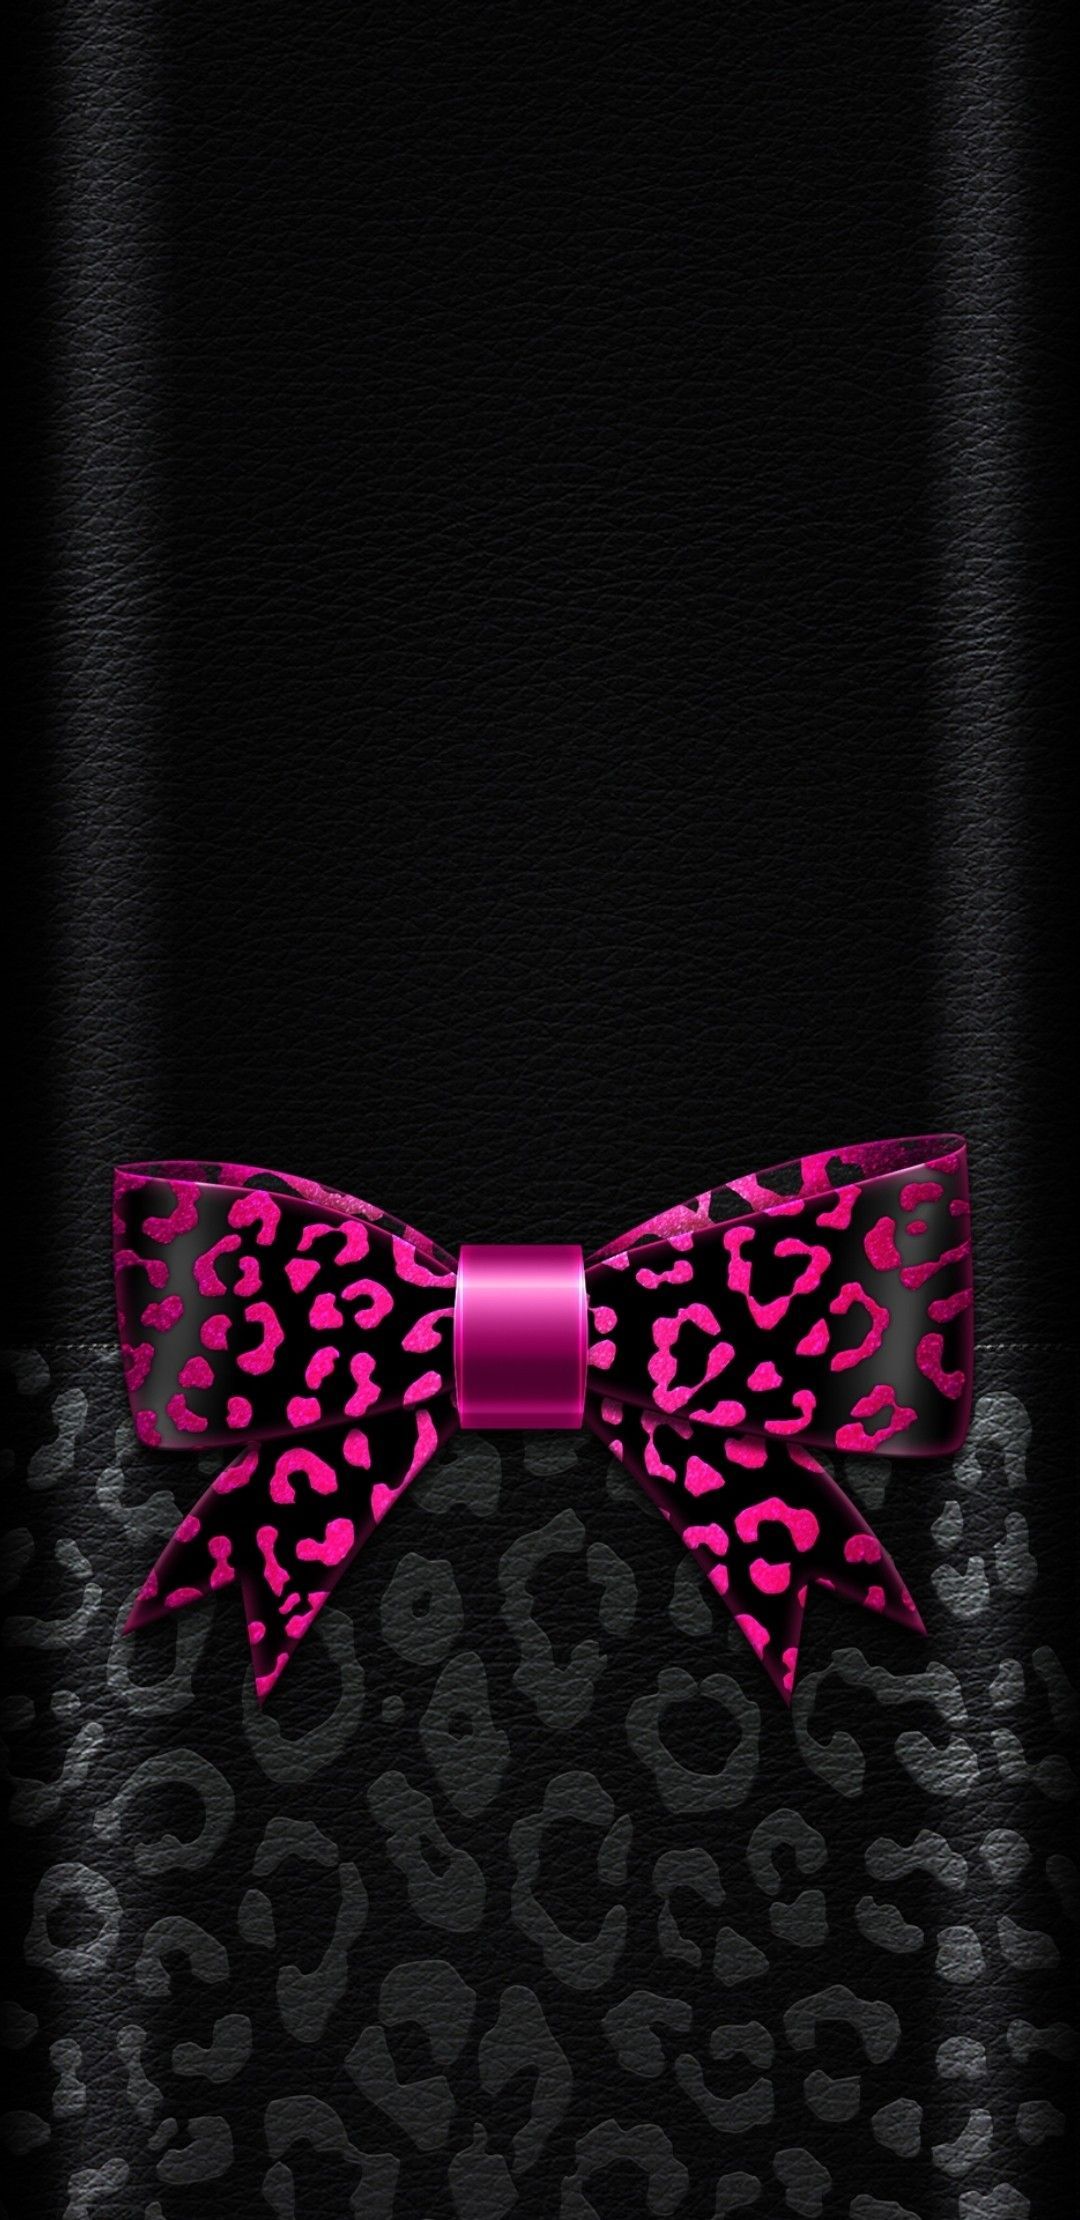 Black and pink bow, #wallpaper #cute #girly. Bow wallpaper iphone, Bow wallpaper, Cellphone wallpaper